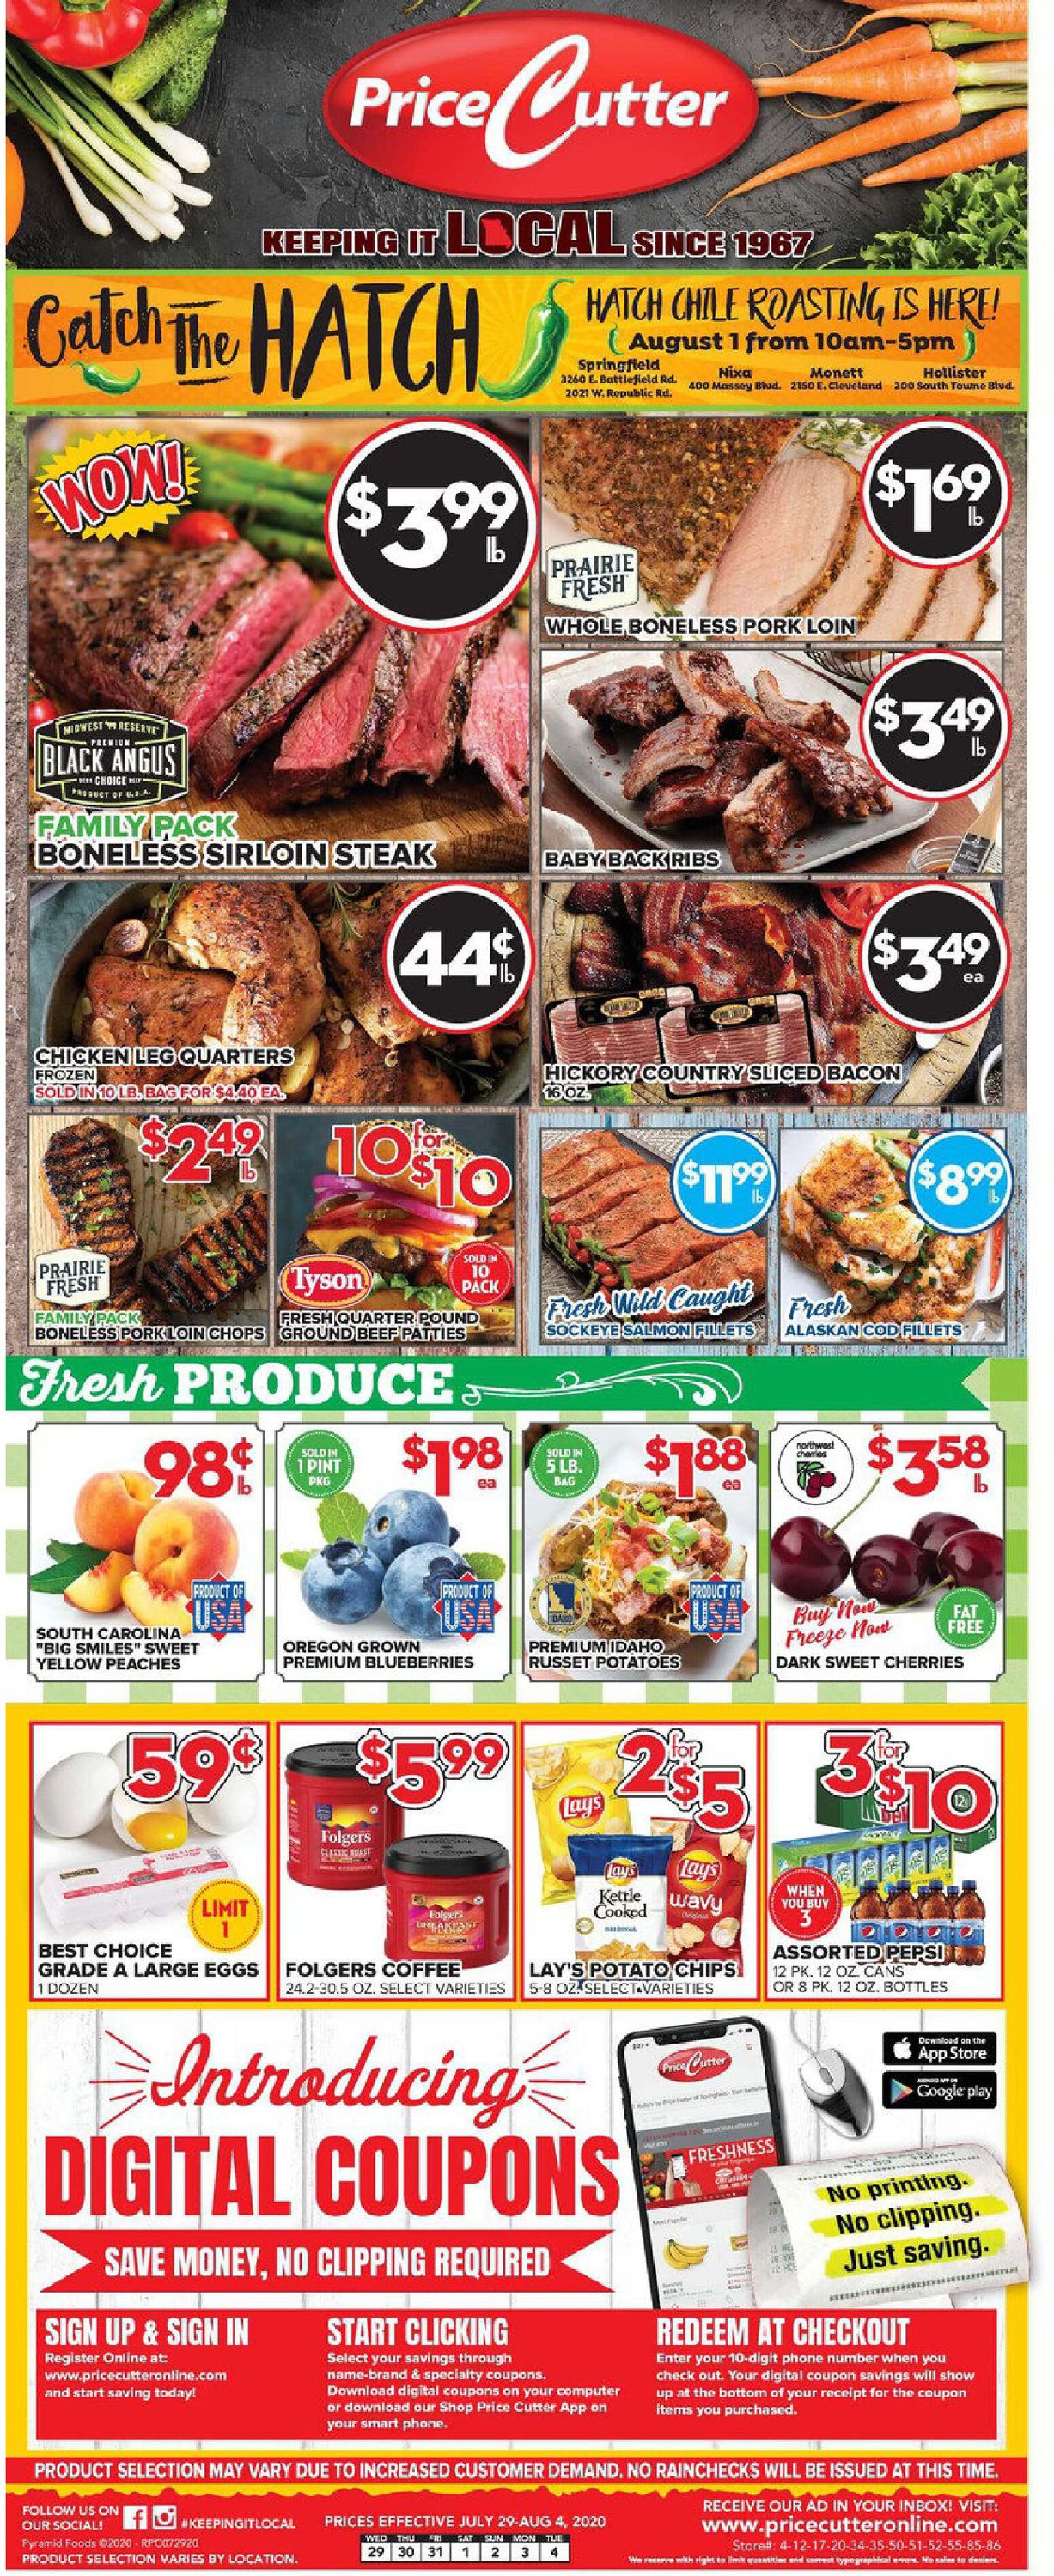 Price Cutter Weekly Ad Circular - valid 07/29-08/04/2020